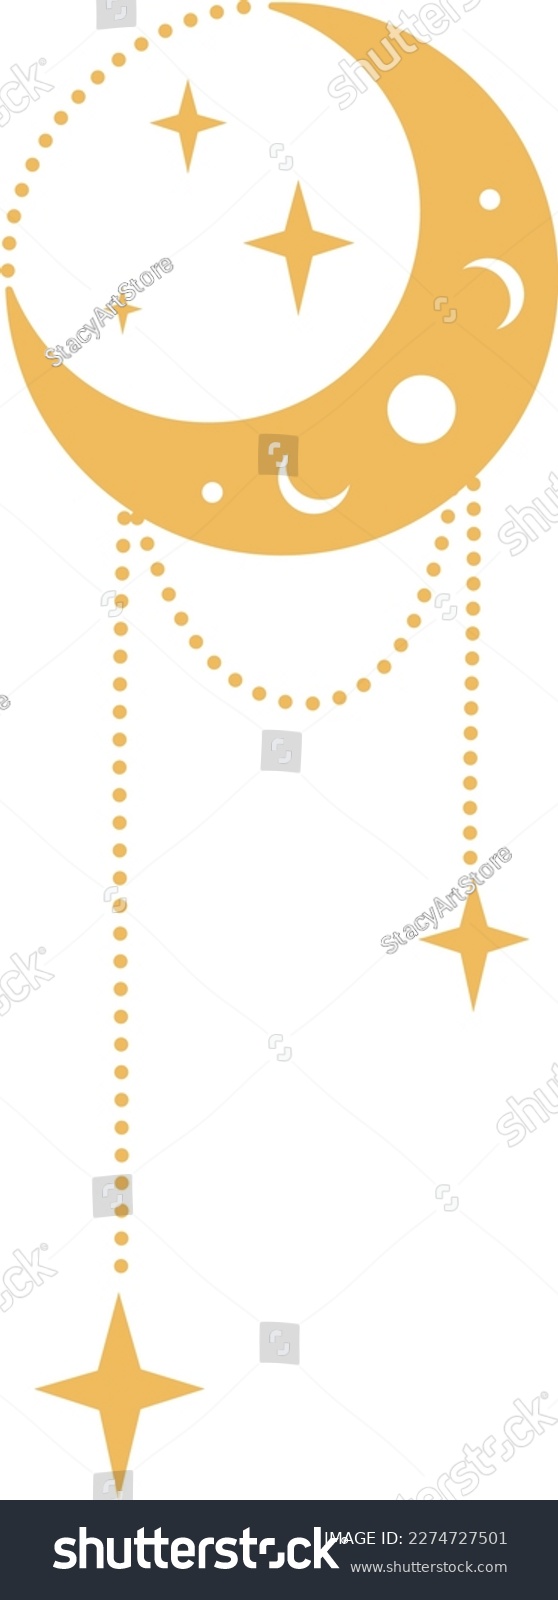 SVG of  Gold Bohemian Crescent Moon with Stars and Rays Astrology Illustrations. Moon Phases SVG Vector Clipart. Celestial, Mystical, Esoteric designs perfect for Printing. T-shirt, Mugs, Cut Boards Cut File svg